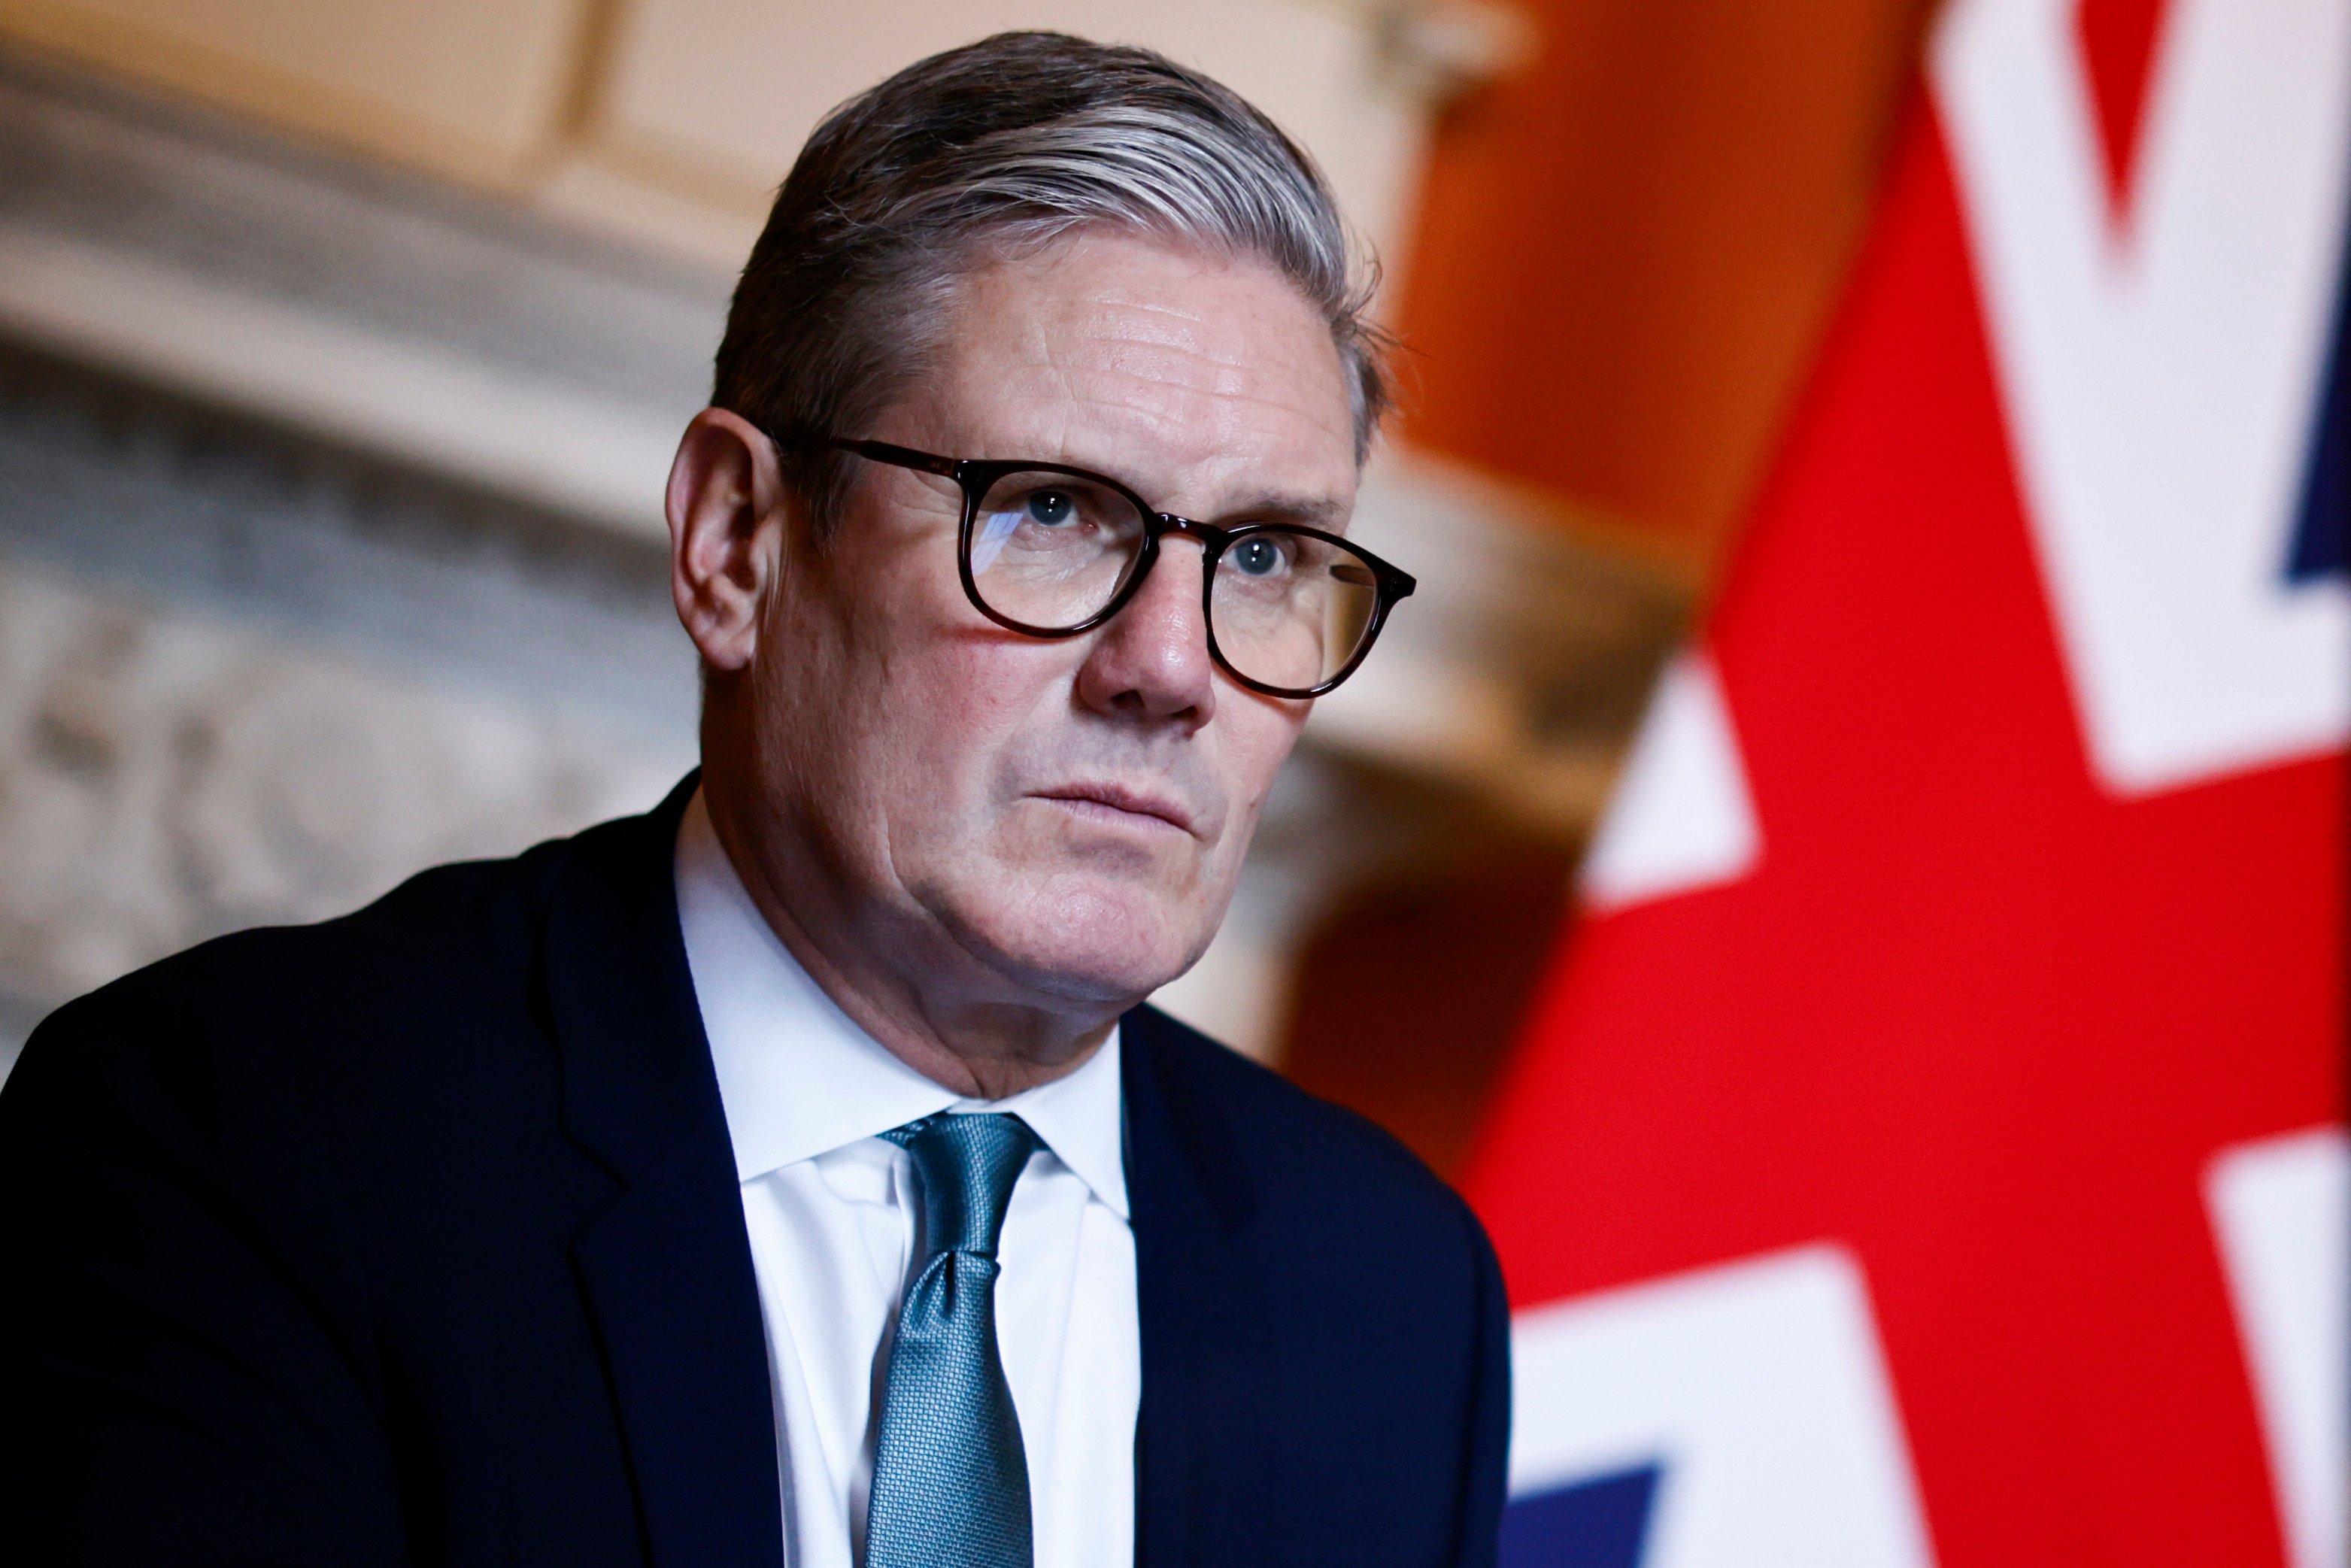 Prime Minister Keir Starmer ordered the review less than a week after he returned from a Nato summit in Washington, where he reaffirmed the Britain’s support for Nato. Photo: AP